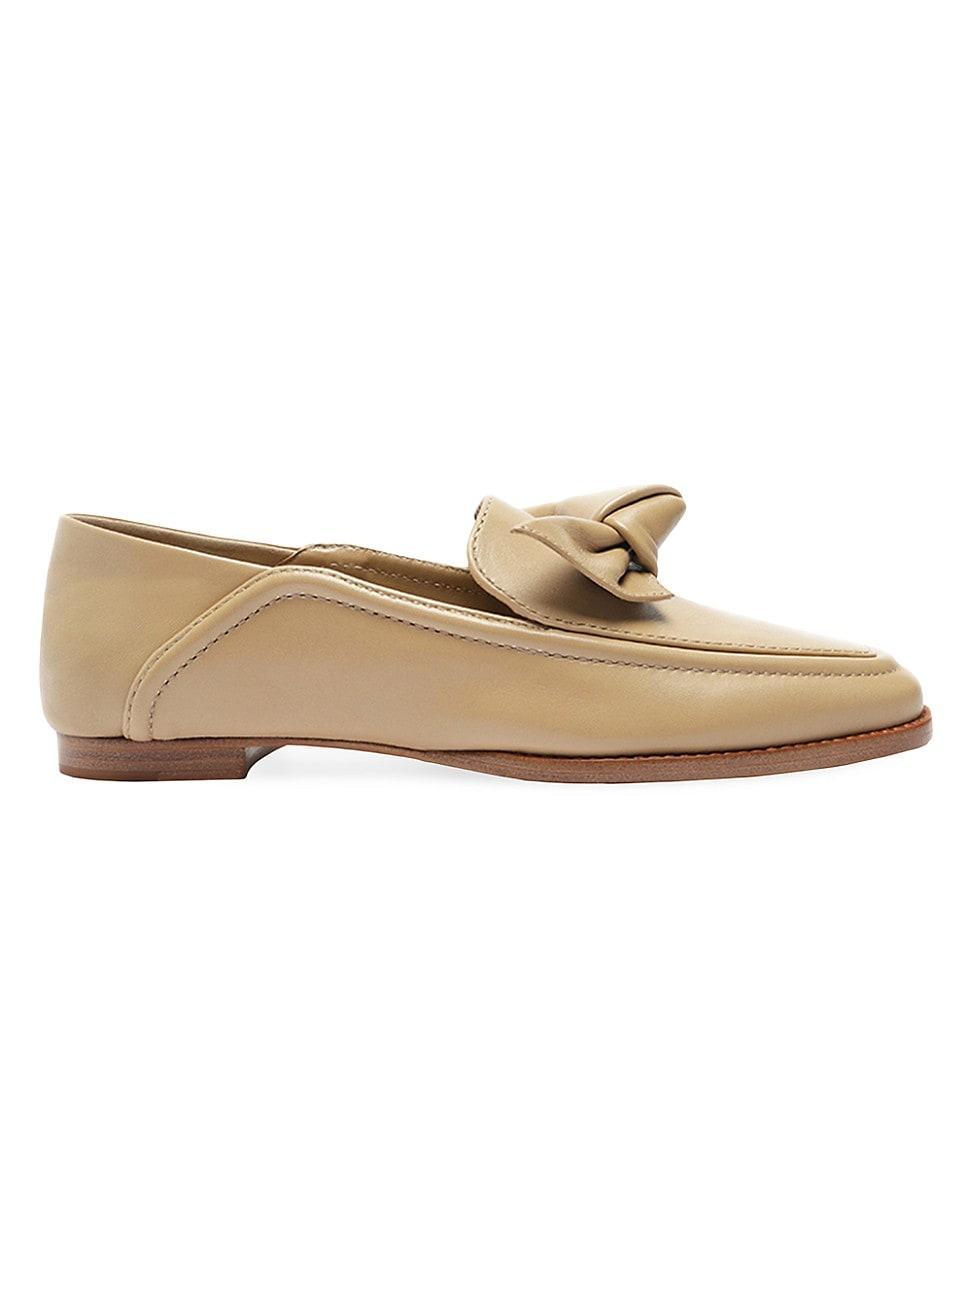 Womens Soft Maxi Clarita Leather Loafers Product Image